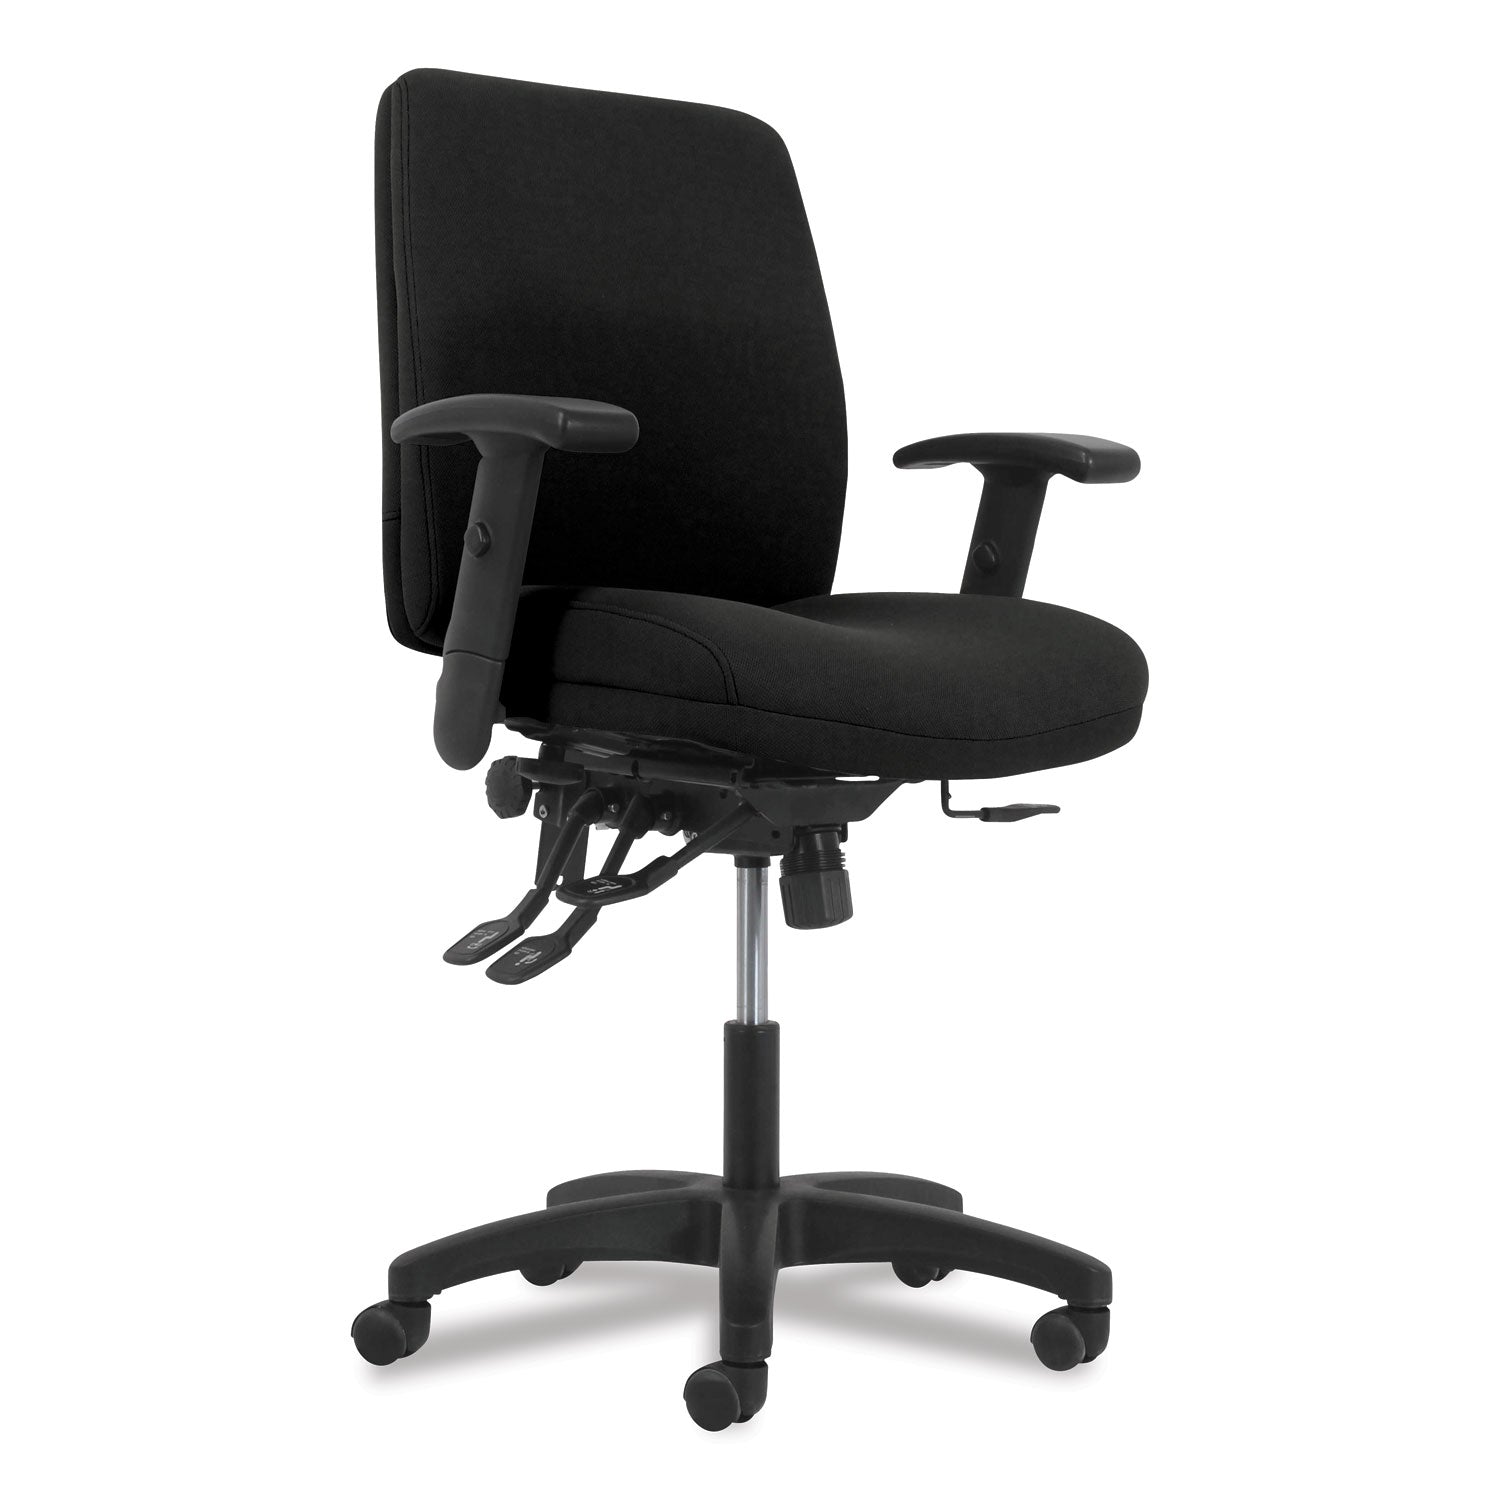 network-mid-back-task-chair-supports-up-to-250-lb-183-to-228-seat-height-black_honvl282a2va10t - 1